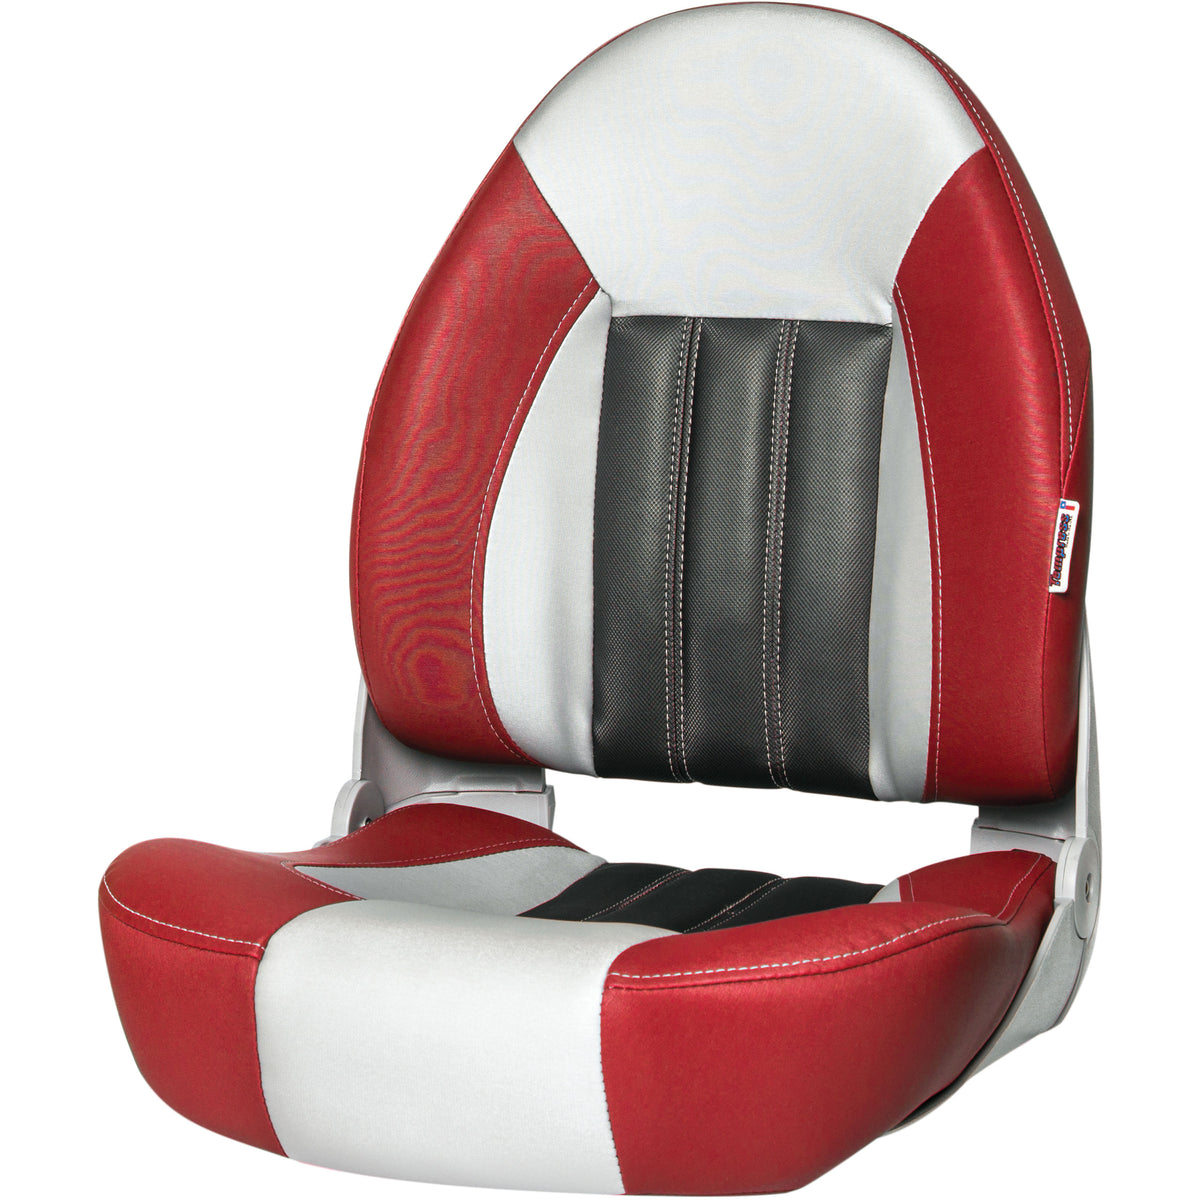 Tempress 68450 Probax High-Back Orthopedic Boat Seat - Red/Gray/Carbon